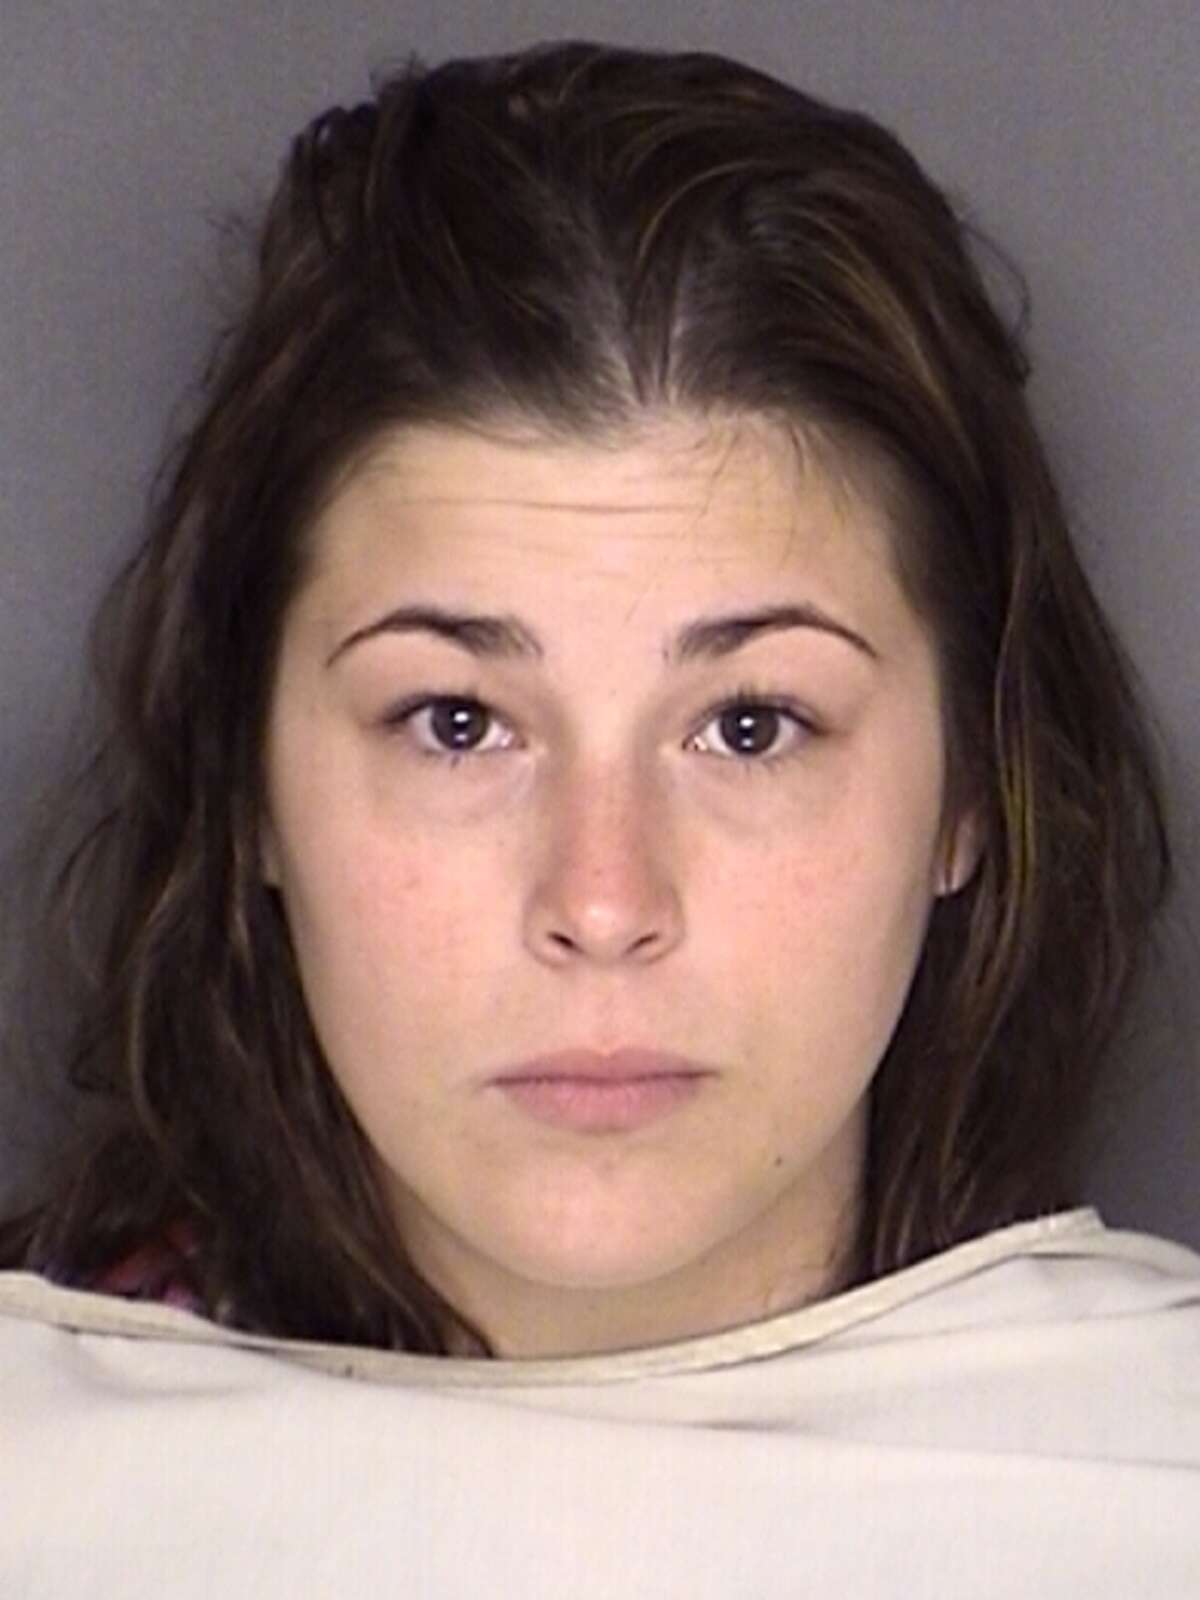 Brittany Leanne Parten, 23, was charged Monday with improper photography or visual recording for her involvement in the alleged Jan. 20 sexual assault on a Waxahachie firefighter.